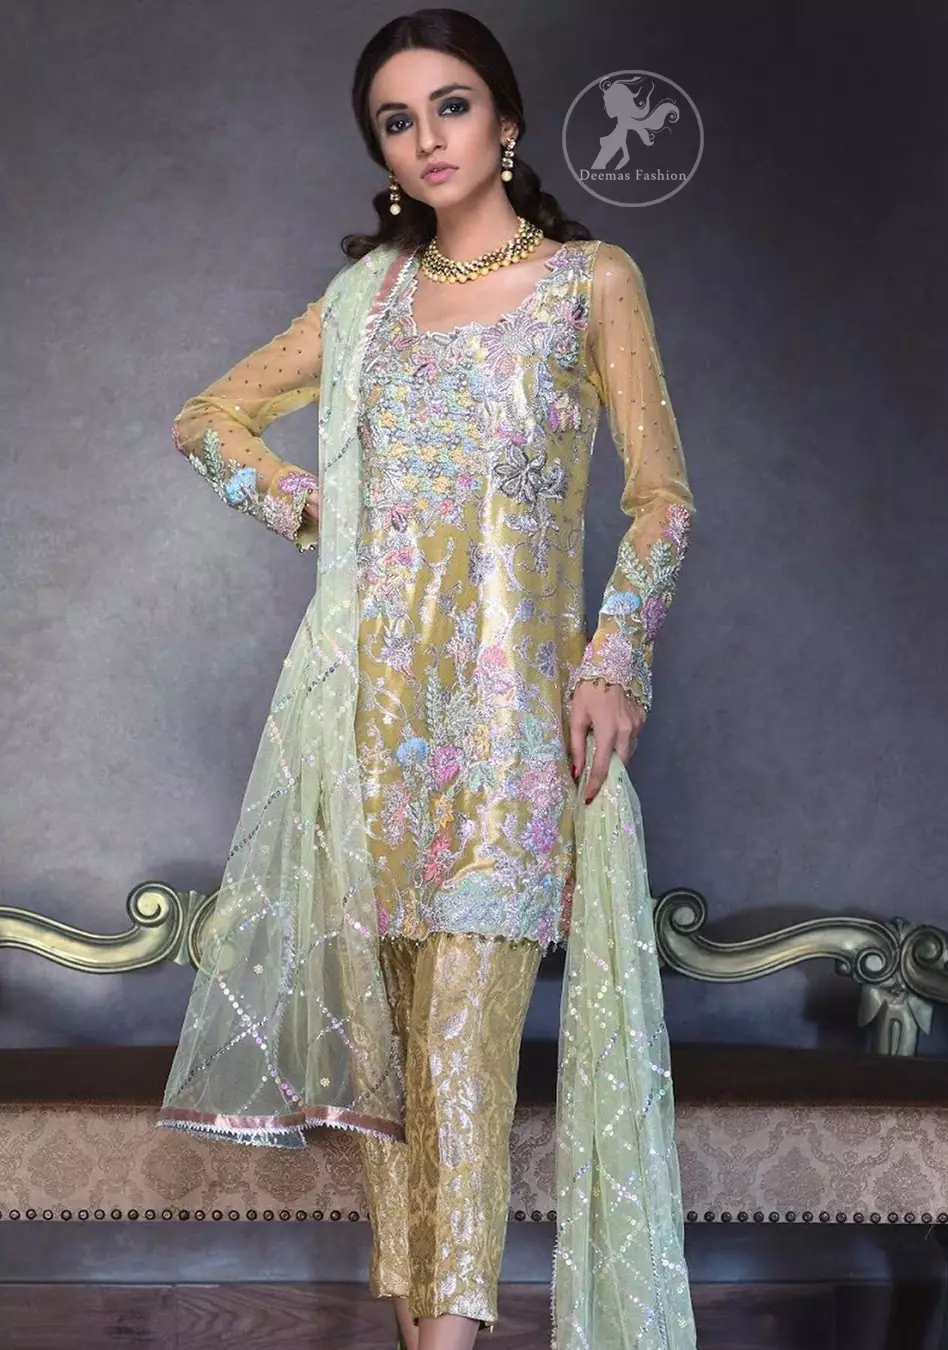 This super stunning  shirt is made of rich floral embroidery which is further enhanced with colorful gota work.  It is highlighted with gota work, sequins and pearls. The detailed scalloped border gives a perfect ending to this shirt. It comes with indian khaki trouser. It is coordinated with chiffon dupatta which is sprinkled with sequins all over it.